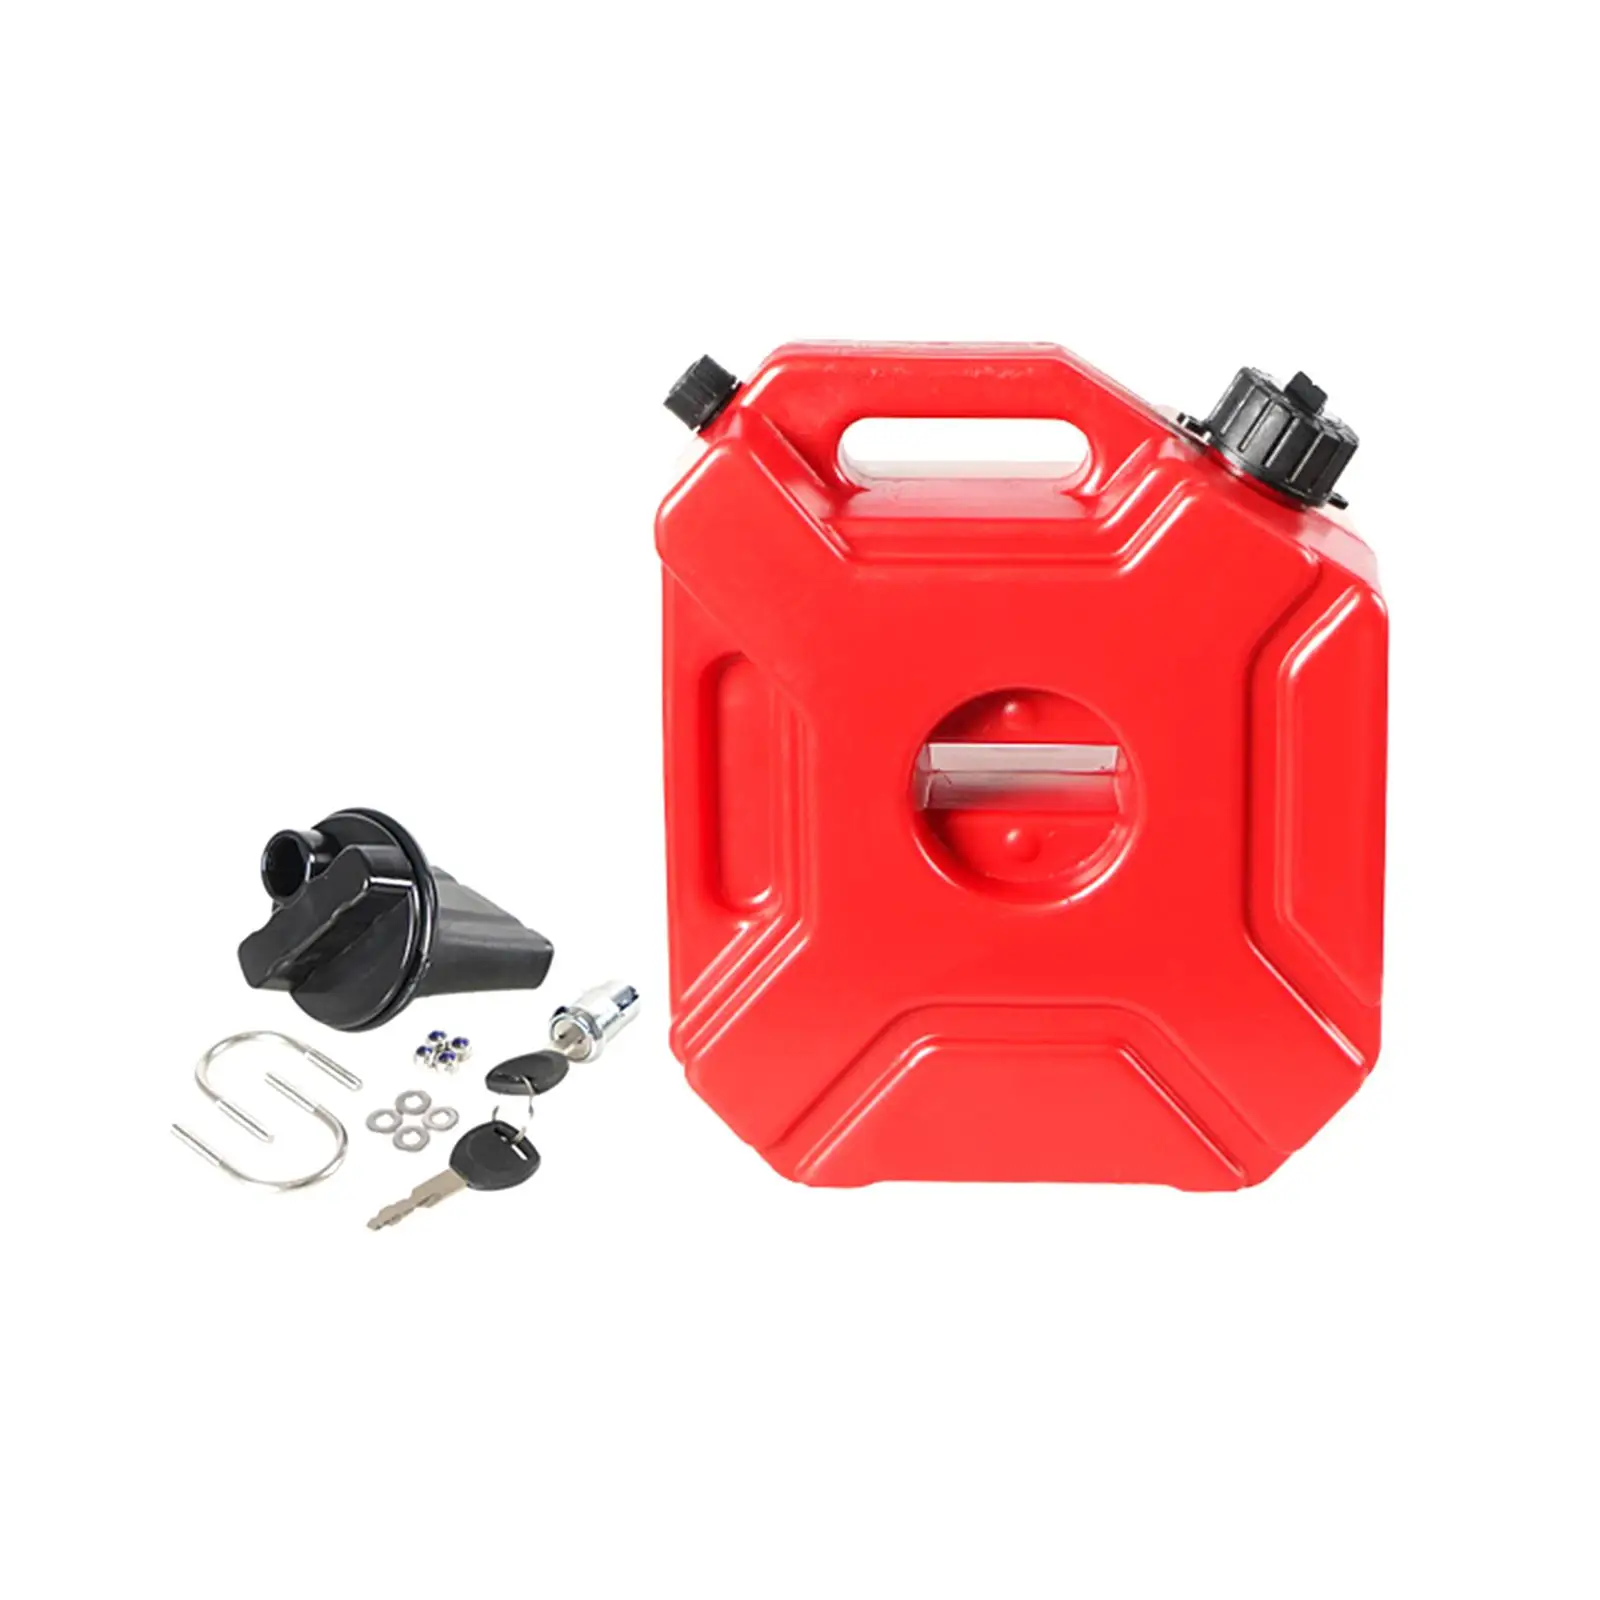 Petrol Tanks 5L Easily Install Universal Fuel Tank Spare Container for Car Travel SUV Automotive Motorcycle Water Resistant